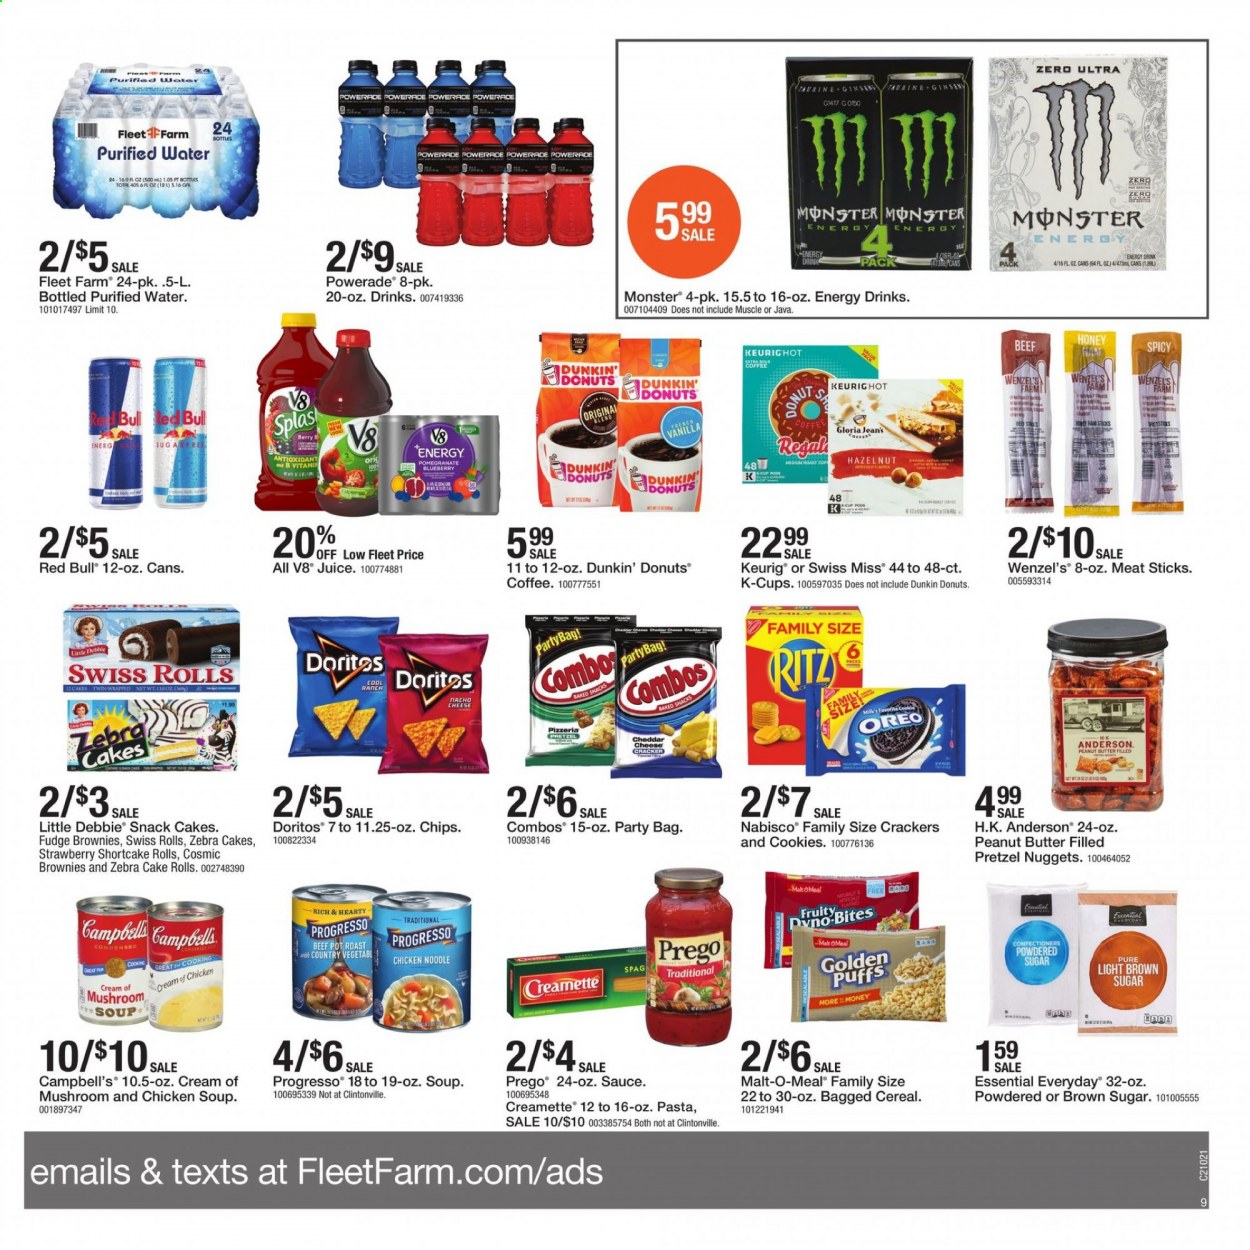 thumbnail - Fleet Farm Flyer - 01/08/2021 - 01/16/2021 - Sales products - pretzels, puffs, cake, brownies, donut, Dunkin' Donuts, cookies, fudge, Oreo, crackers, Swiss Miss, RITZ, Doritos, chips, snack, icing sugar, malt, soup, Progresso, cereals, pasta, noodles, Creamette, Campbell's, peanut butter, Powerade, juice, energy drink, Monster, Red Bull, purified water, coffee, coffee capsules, K-Cups, Keurig, pot, bag. Page 9.